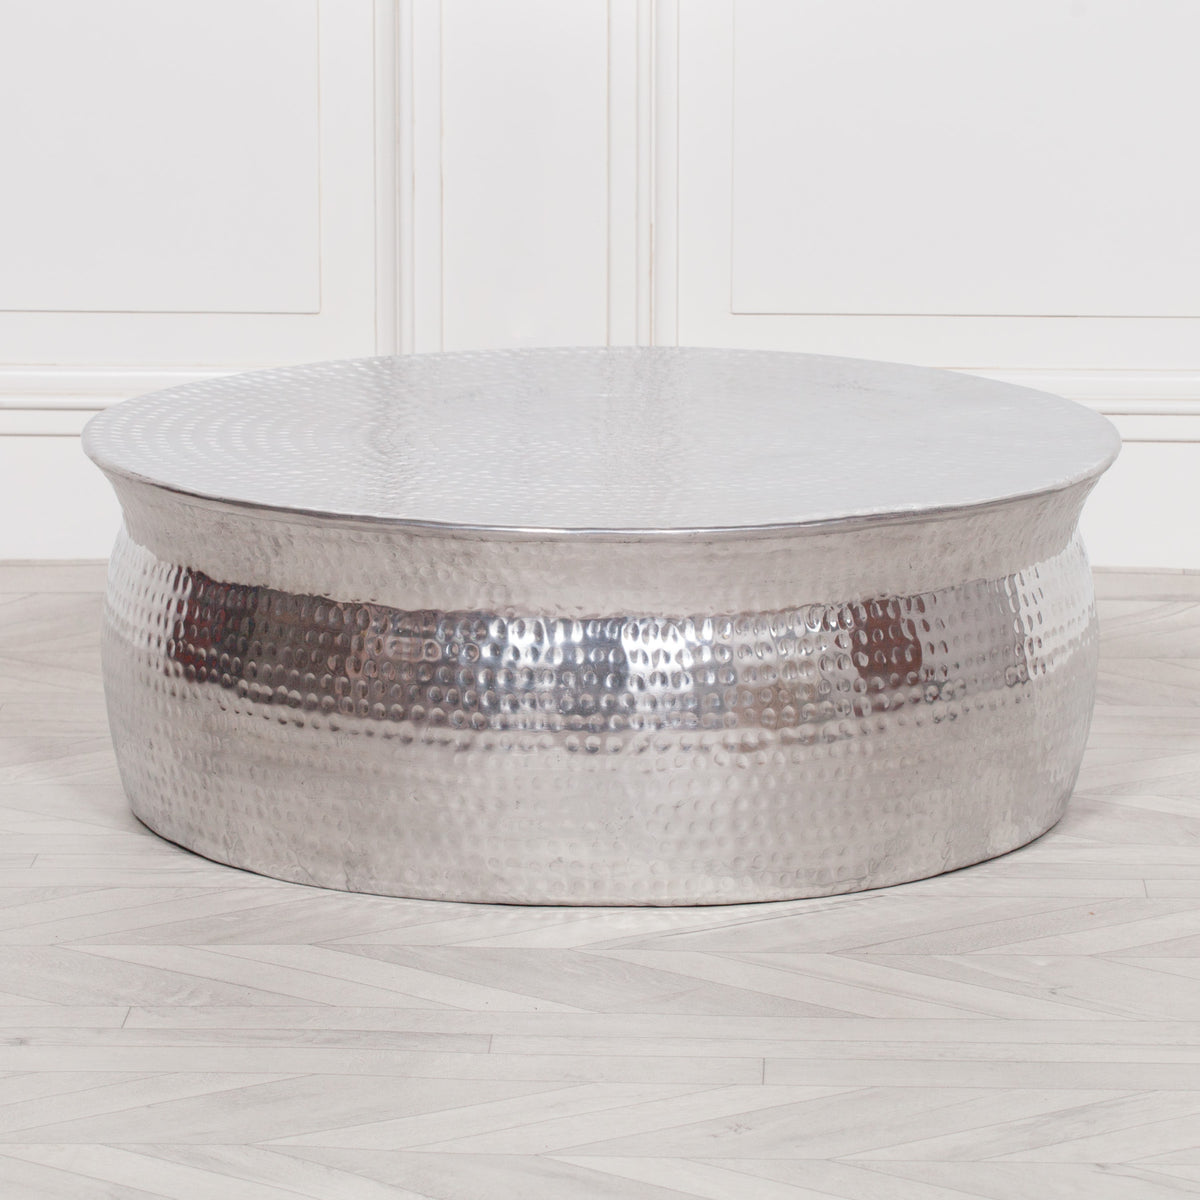 Interior design modern furniture home hammered metal coffee table uk round coffee table silver uk